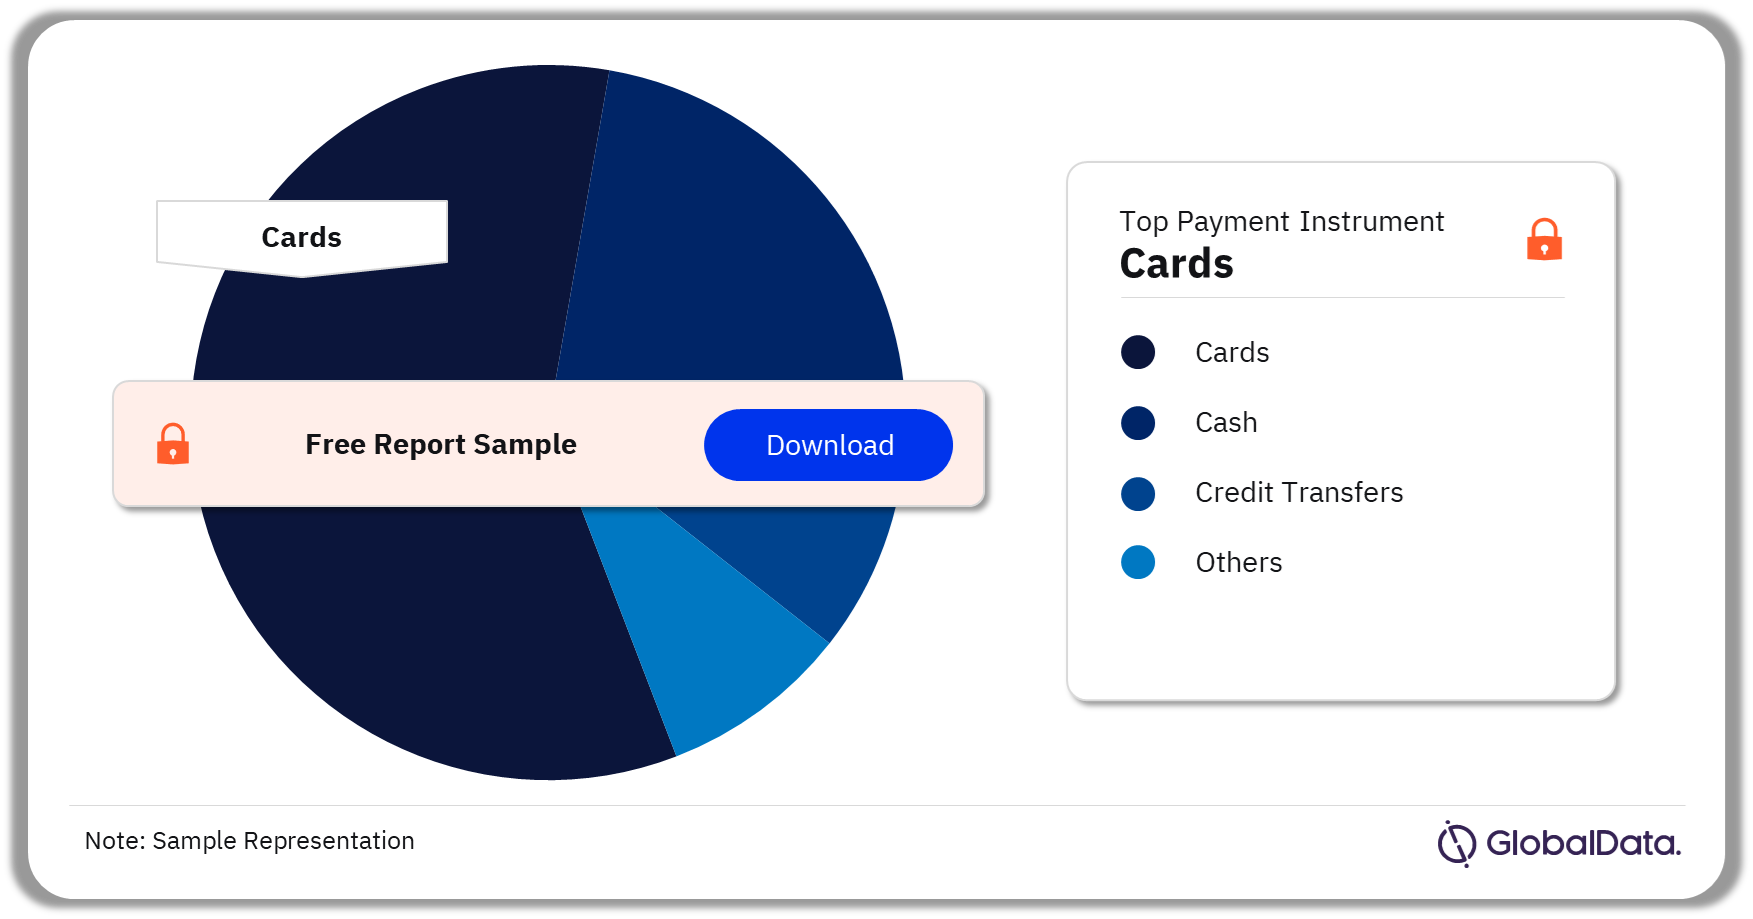 Netherlands Cards and Payments Market Analysis by Payment Instruments (Volume Terms), 2023 (%)